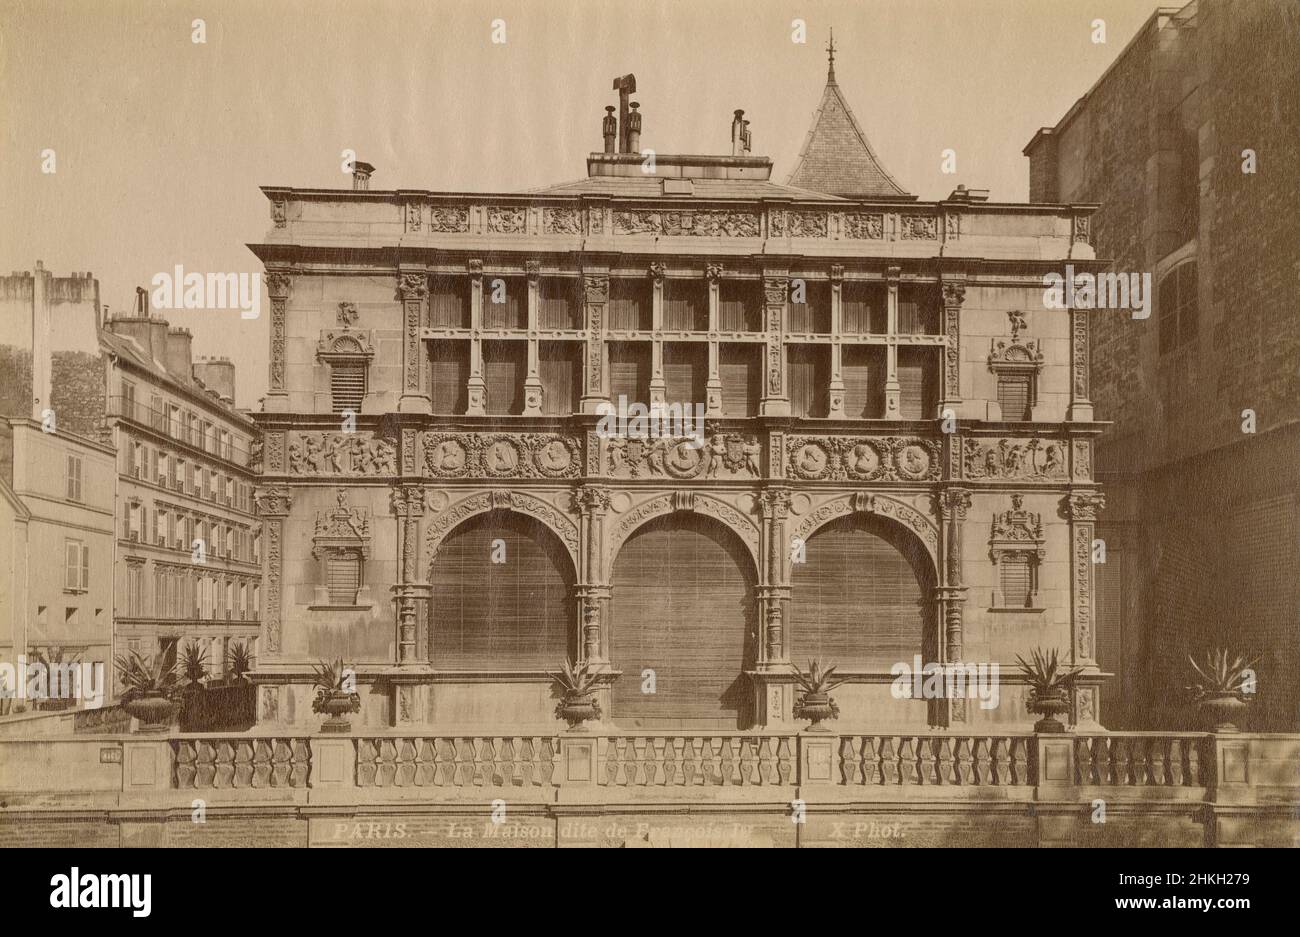 Antique circa 1890 photograph of House of Francis I on Rue Victor Genoux in Luxeuil-les-Bains, France. SOURCE: ORIGINAL ALBUMEN PHOTOGRAPH Stock Photo